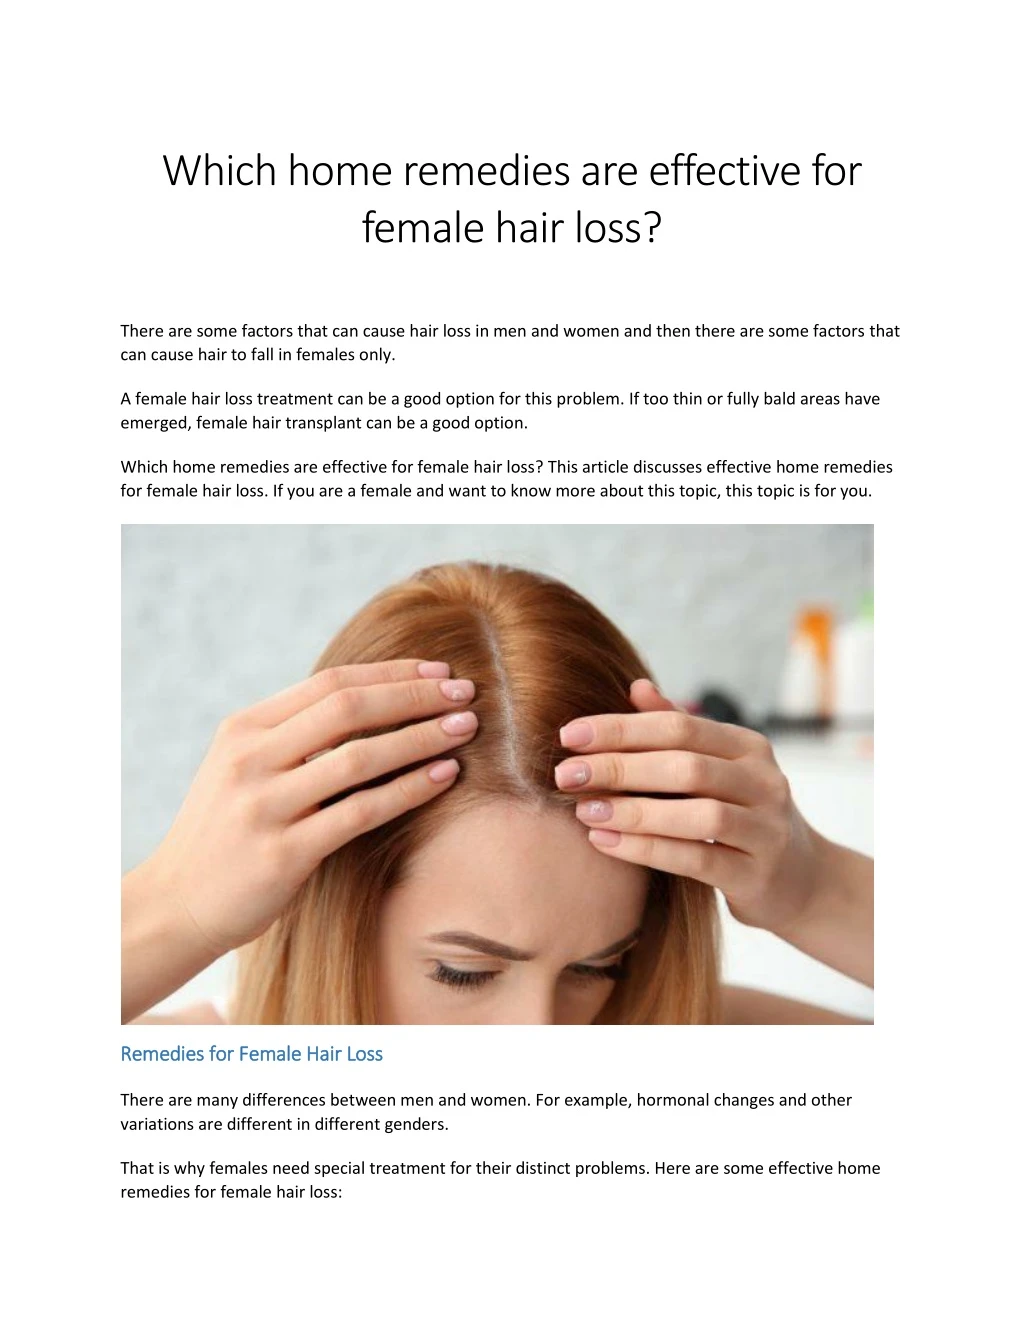 which home remedies are effective for female hair